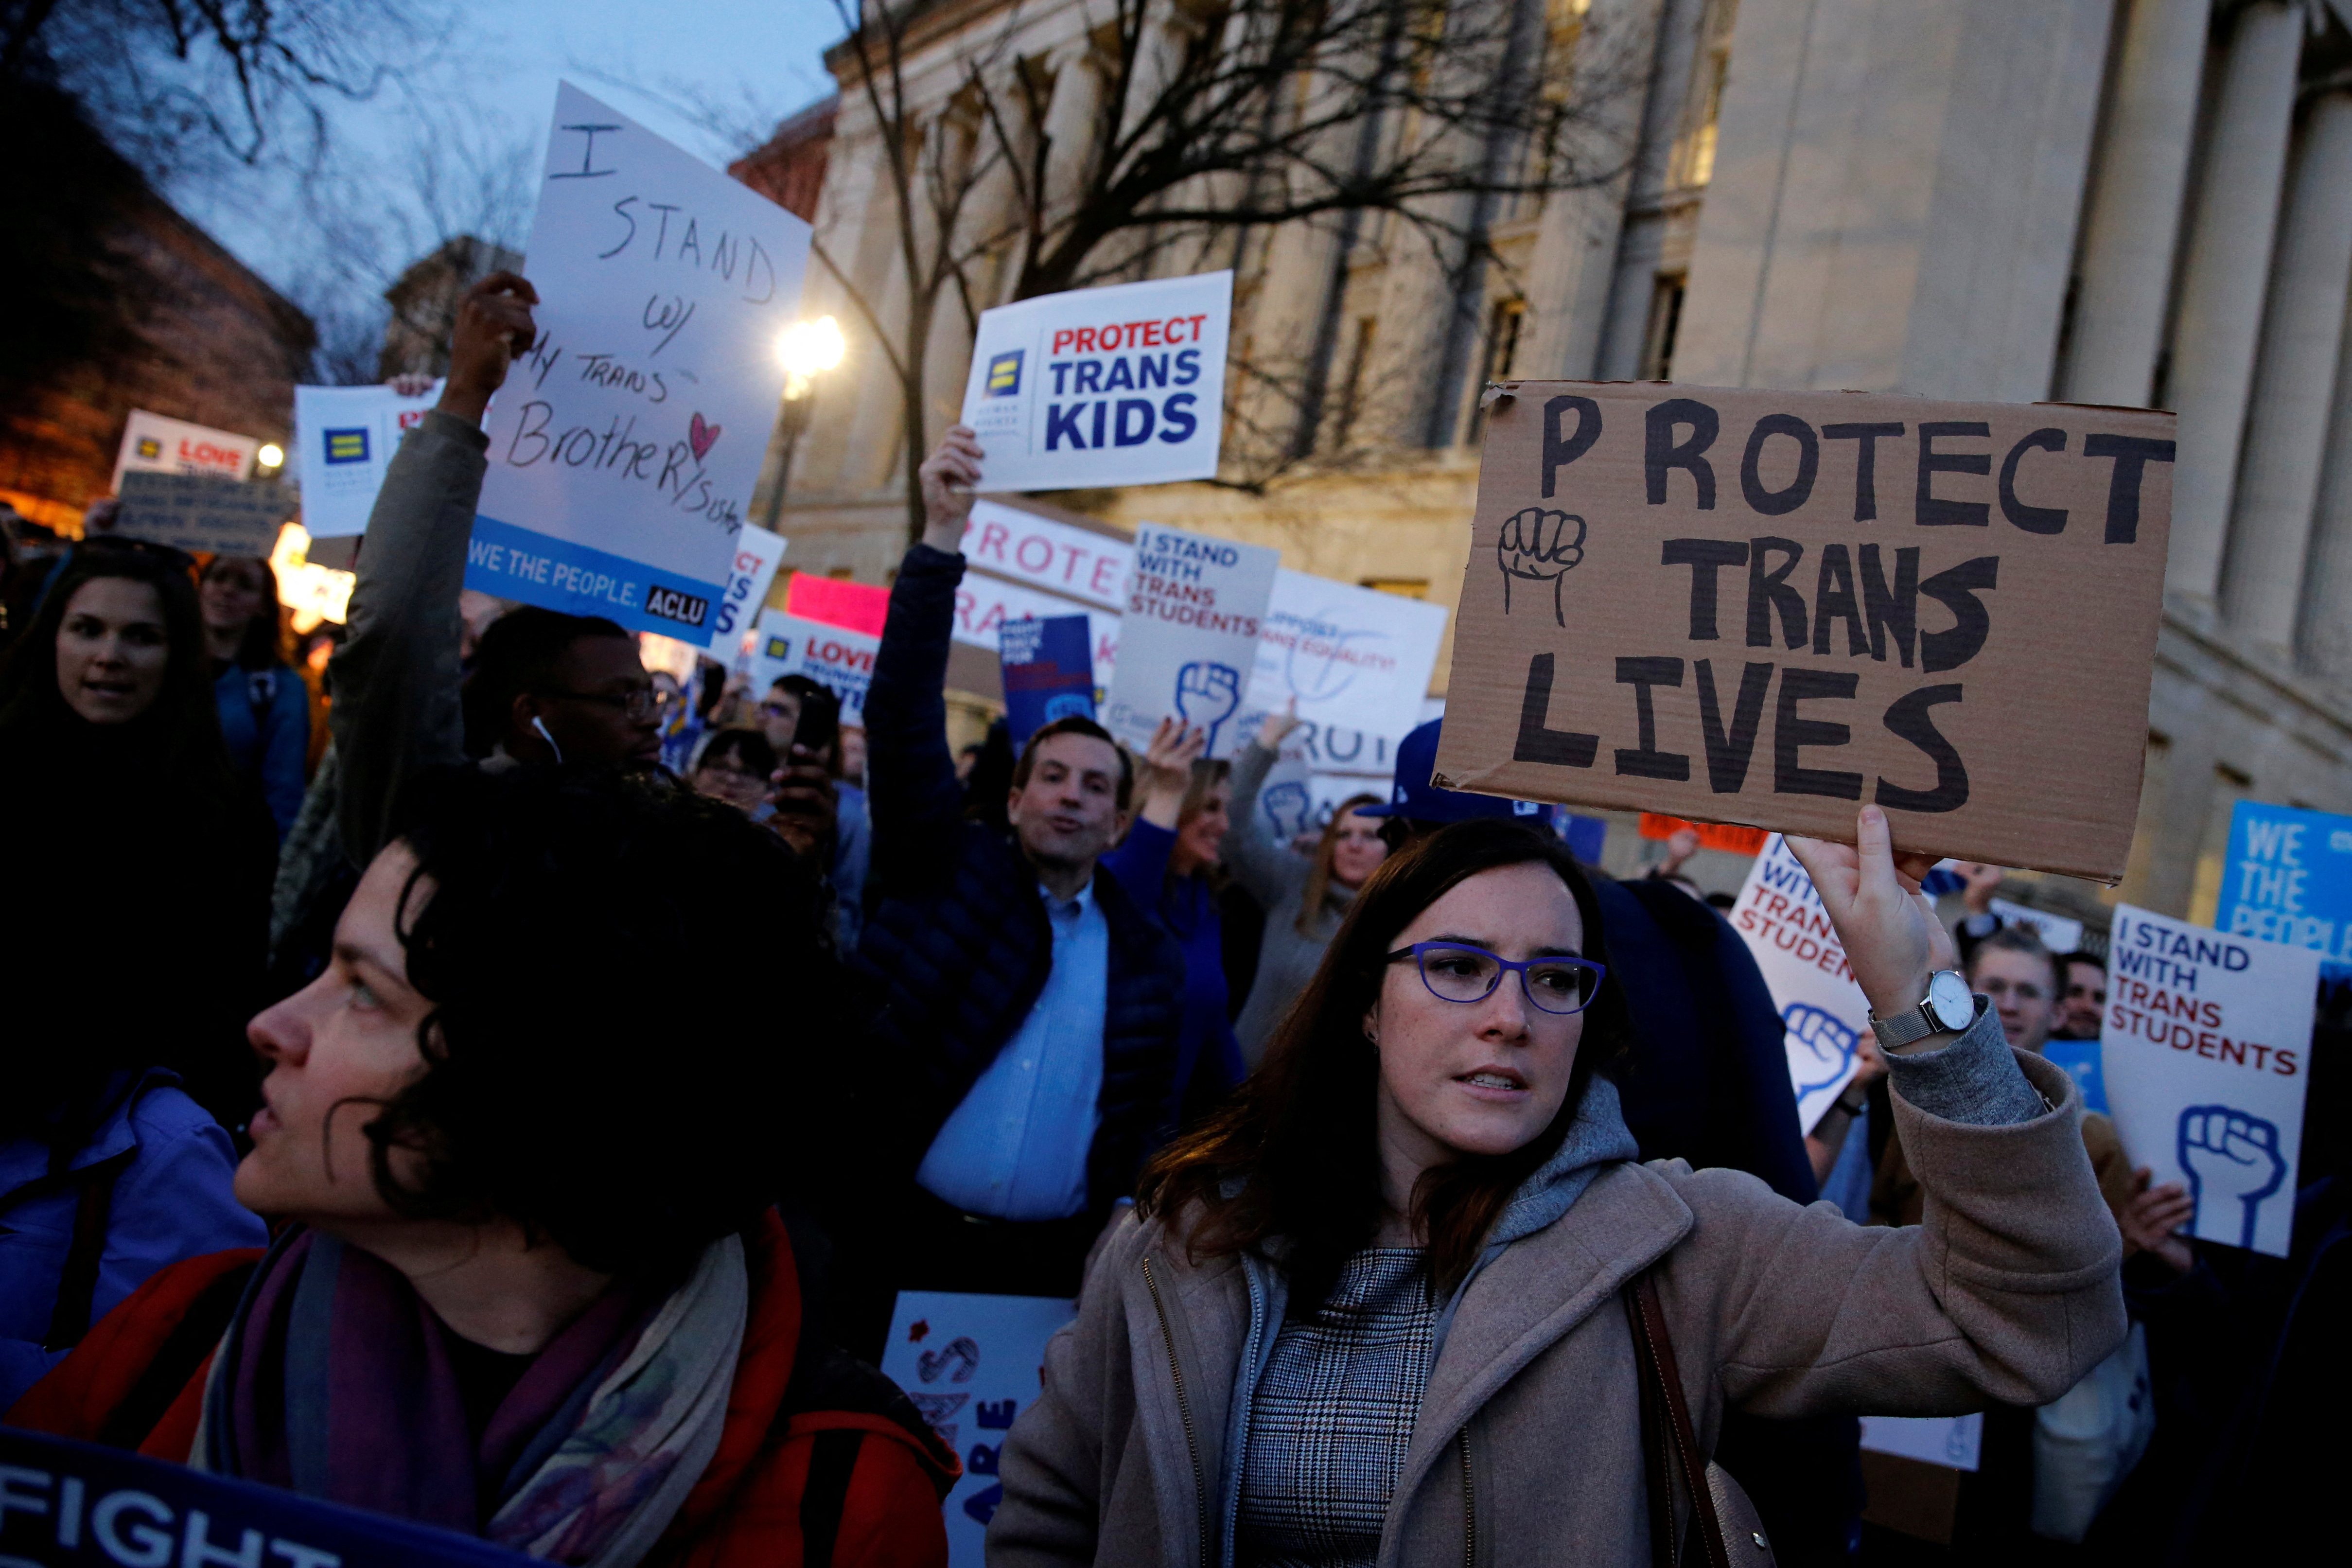 Transgender activists and supporters protest near the White House in Washington